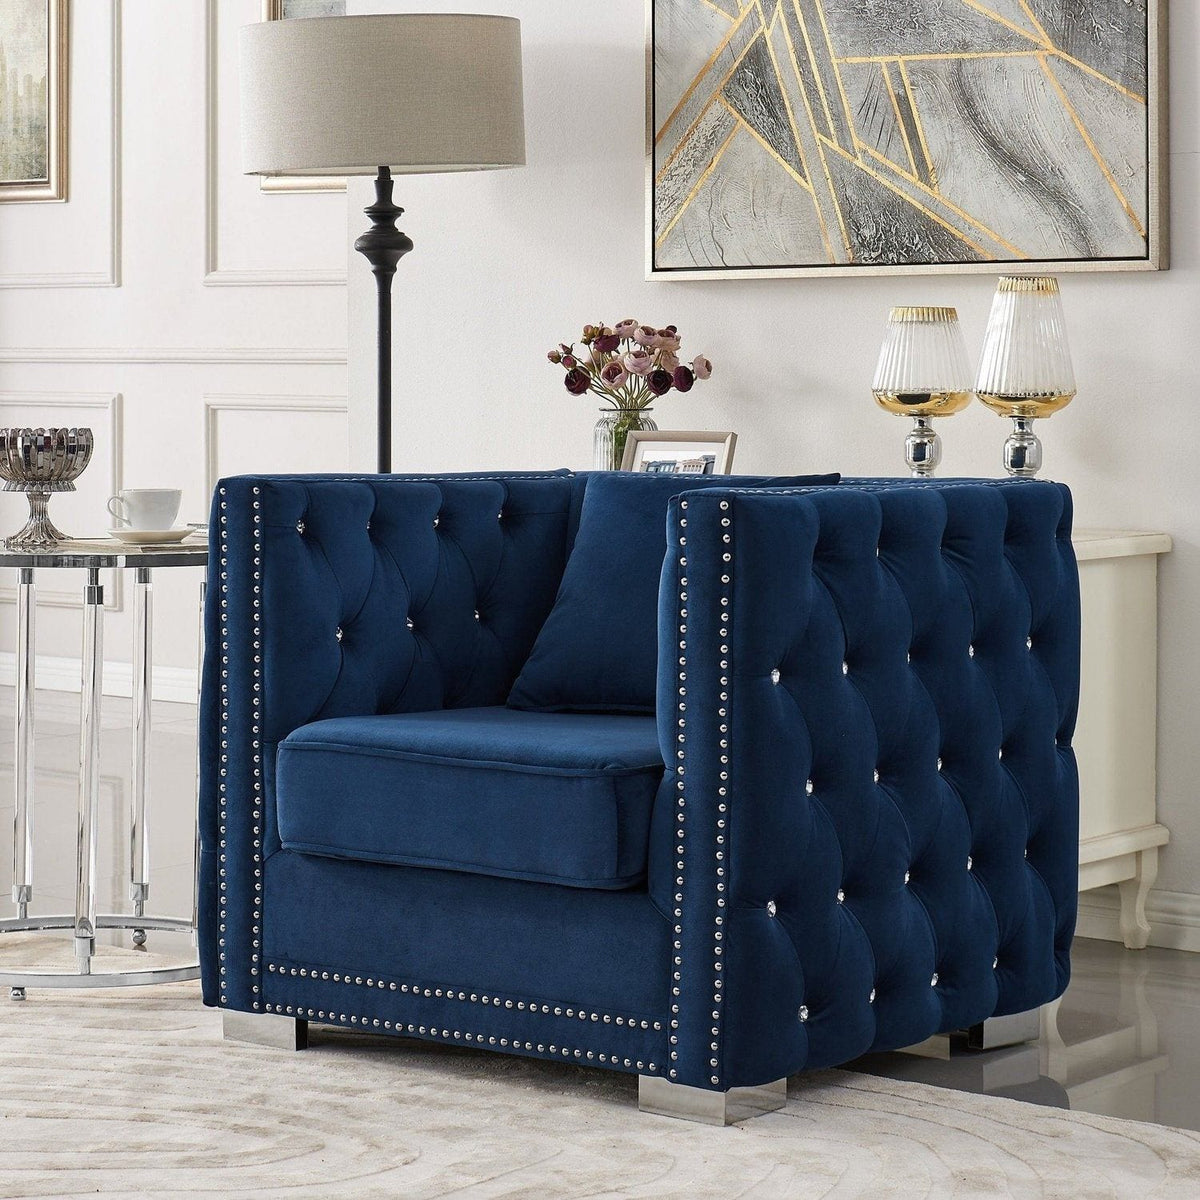 Club Chic Christophe Chair Iconic Tufted Home Velvet Arm Shelter Design – Home